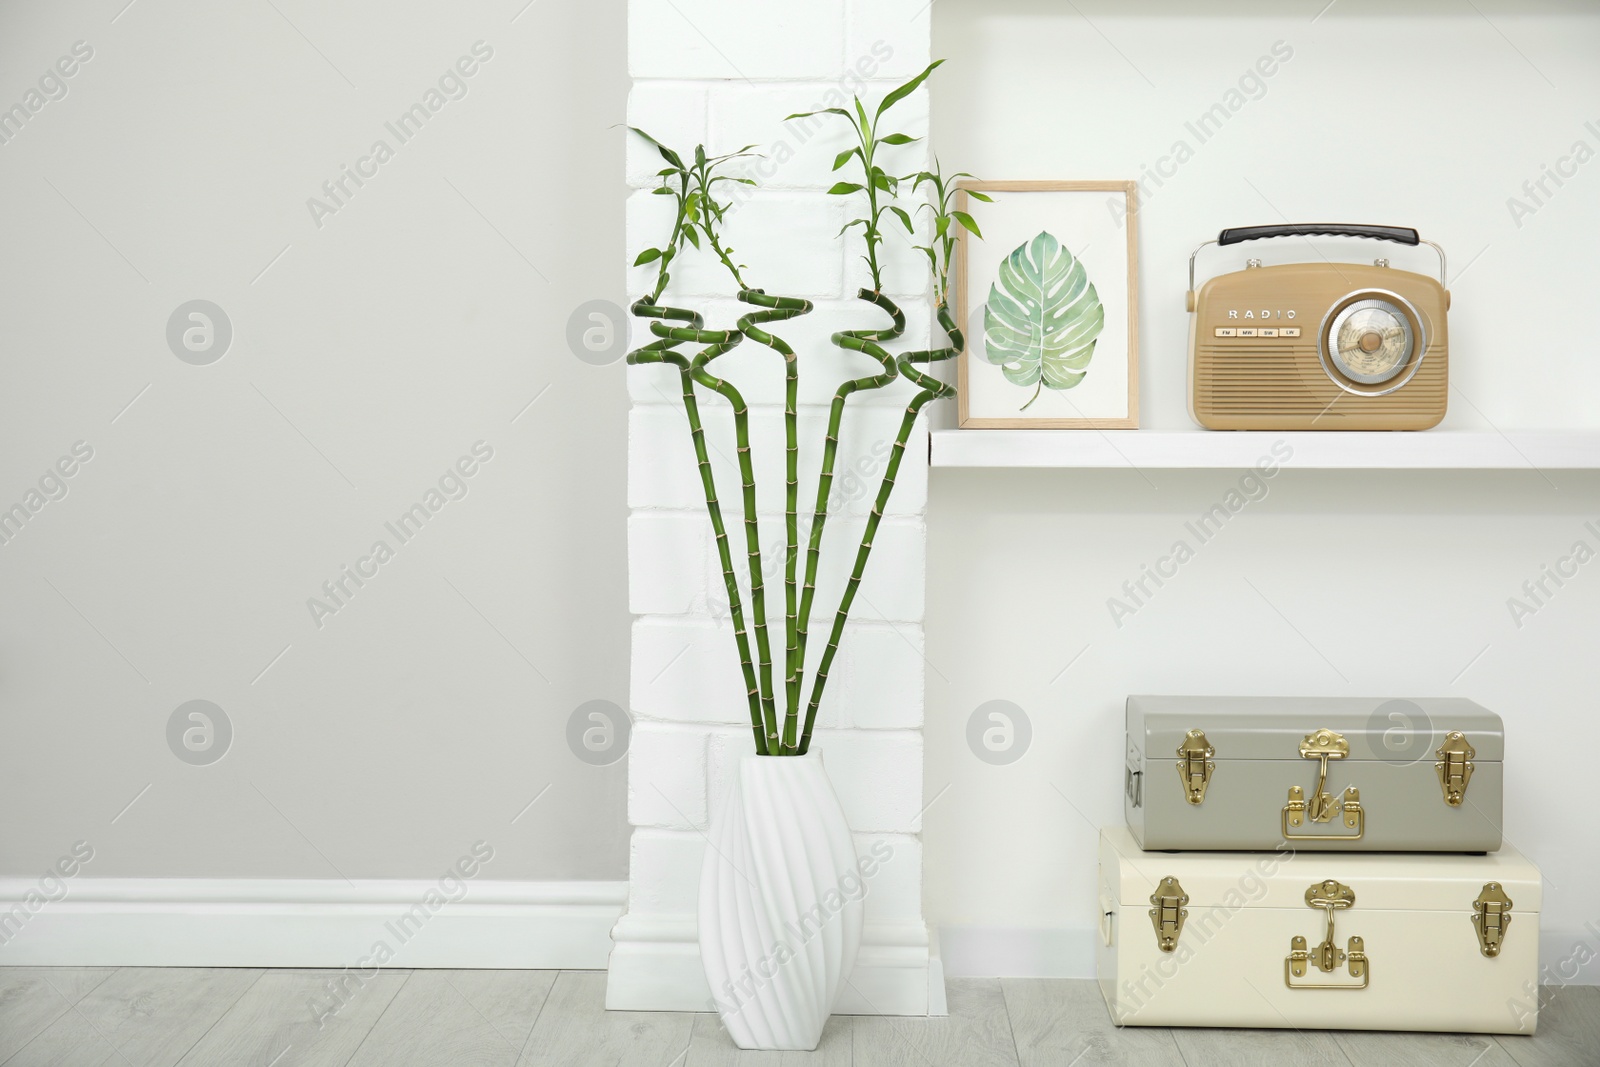 Photo of Vase with green bamboo stems on floor in room. Interior design